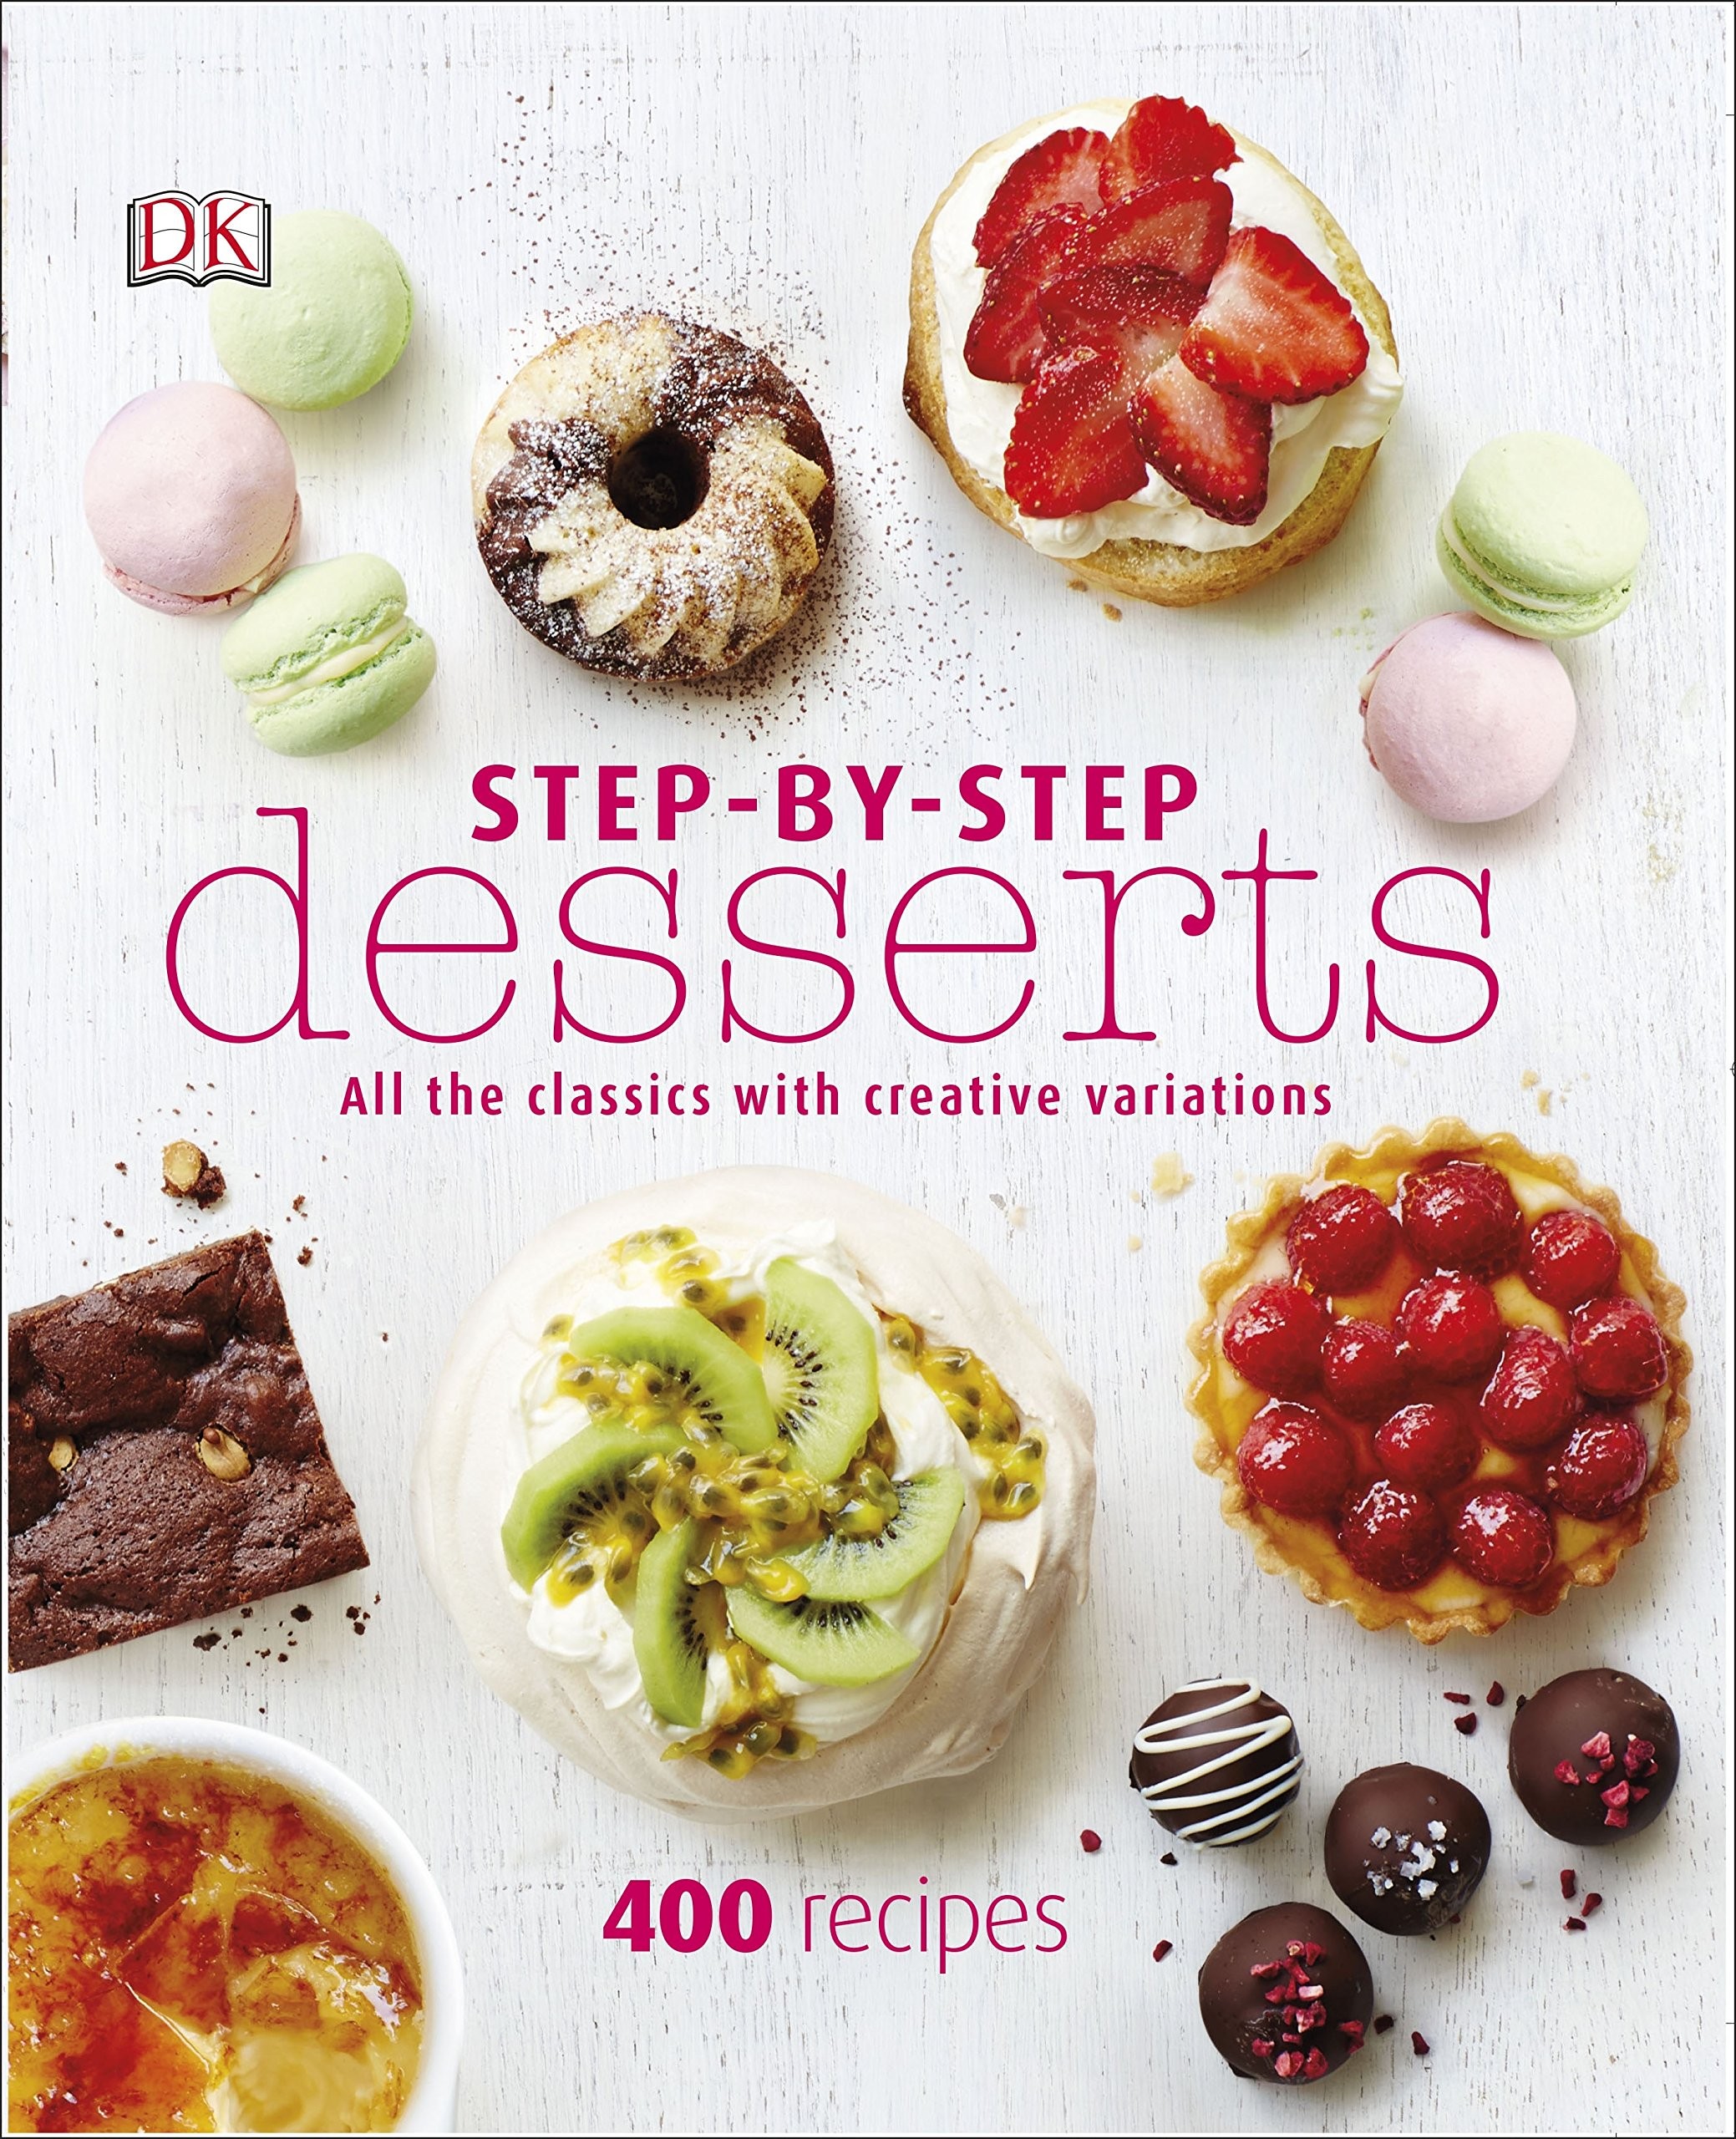 Step-By-Step Desserts: All the Classics with Creative Variations (Dk)